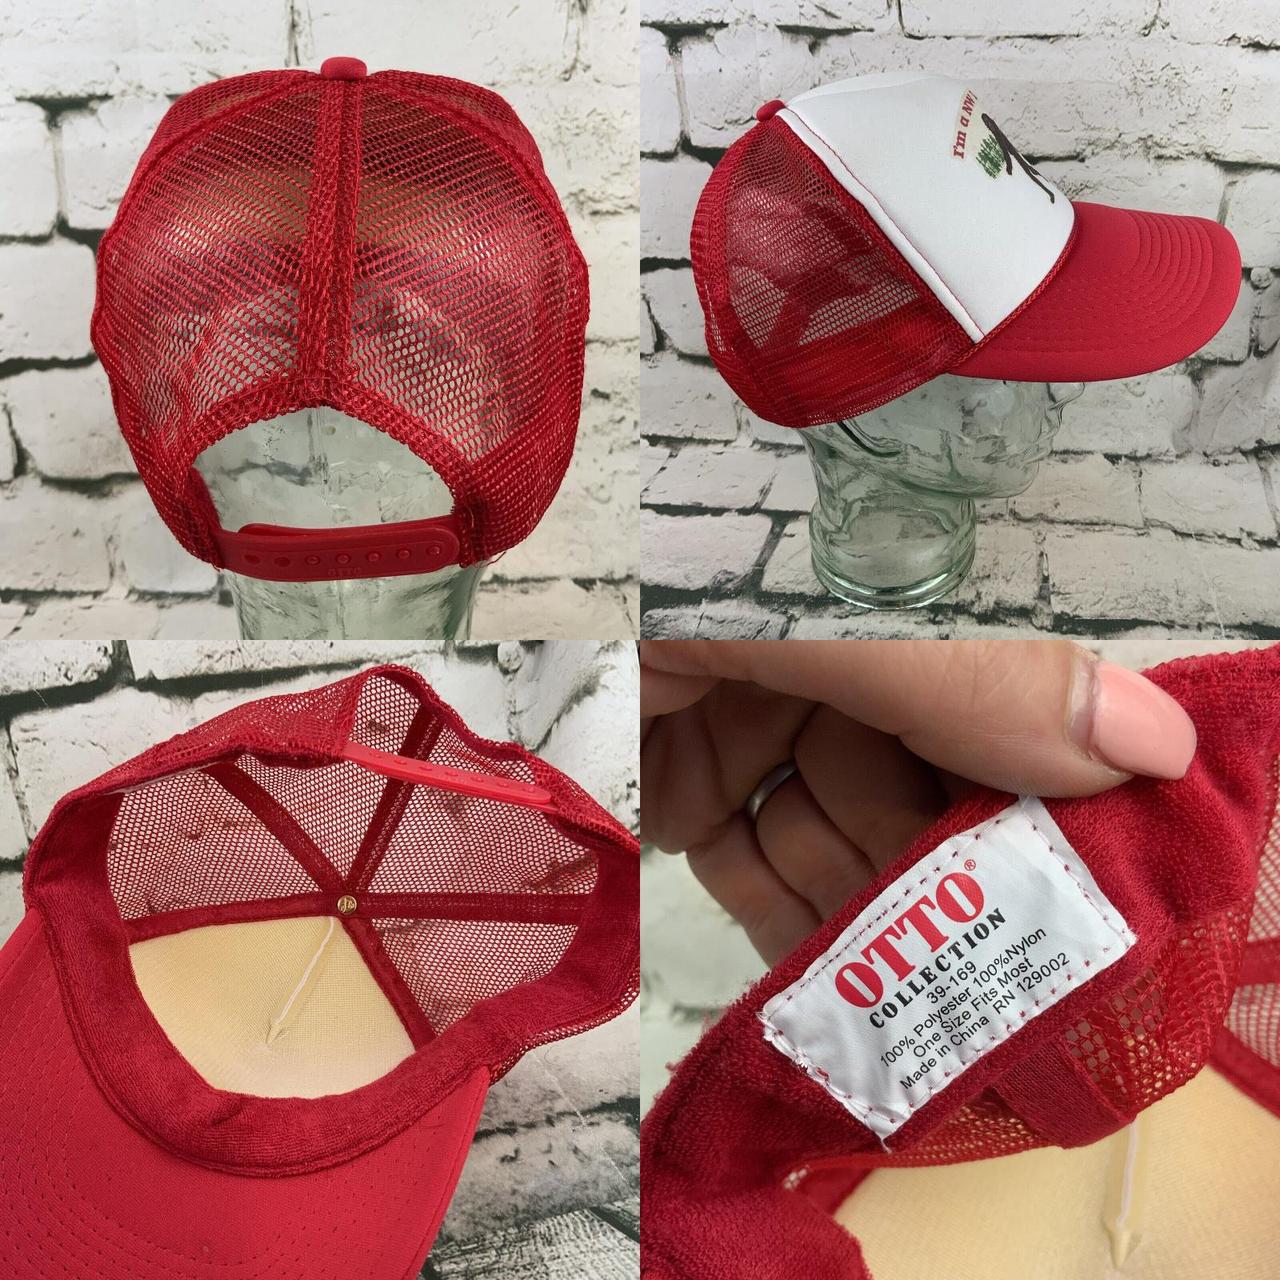 Lotto Men's White and Red Hat (4)